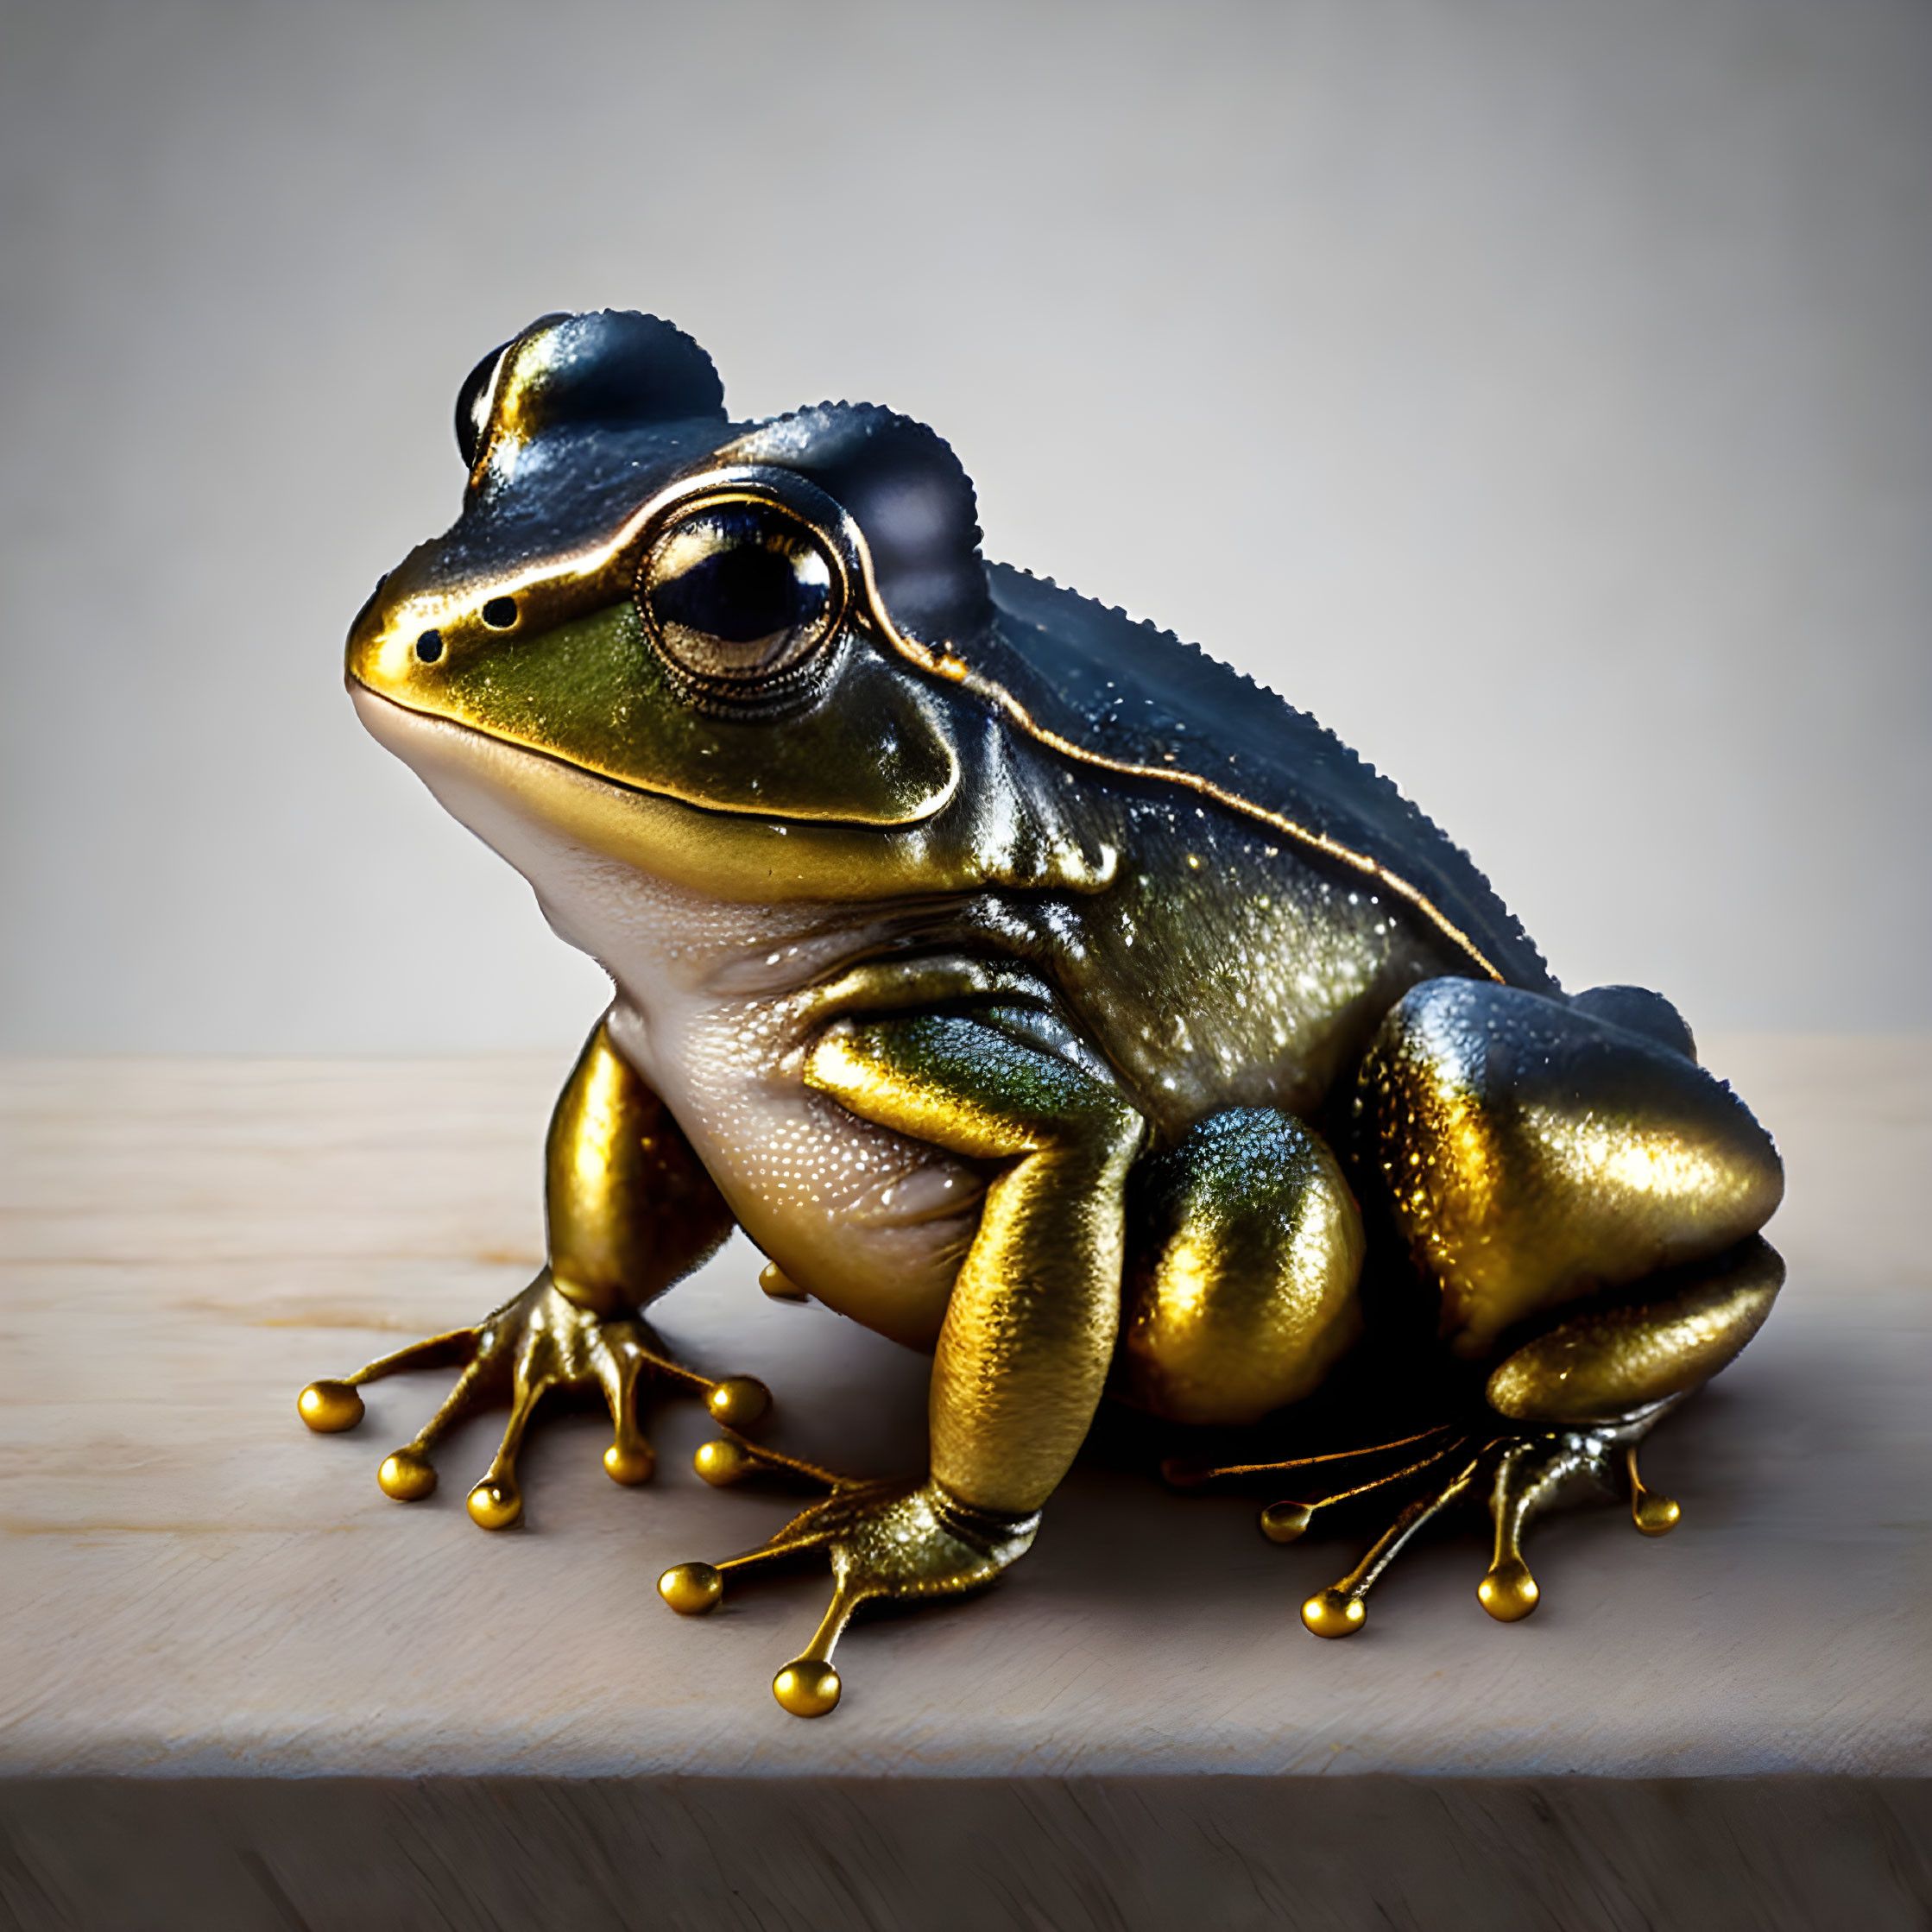 Metallic Sheen Frog with Gold and Black Hues on Wooden Surface